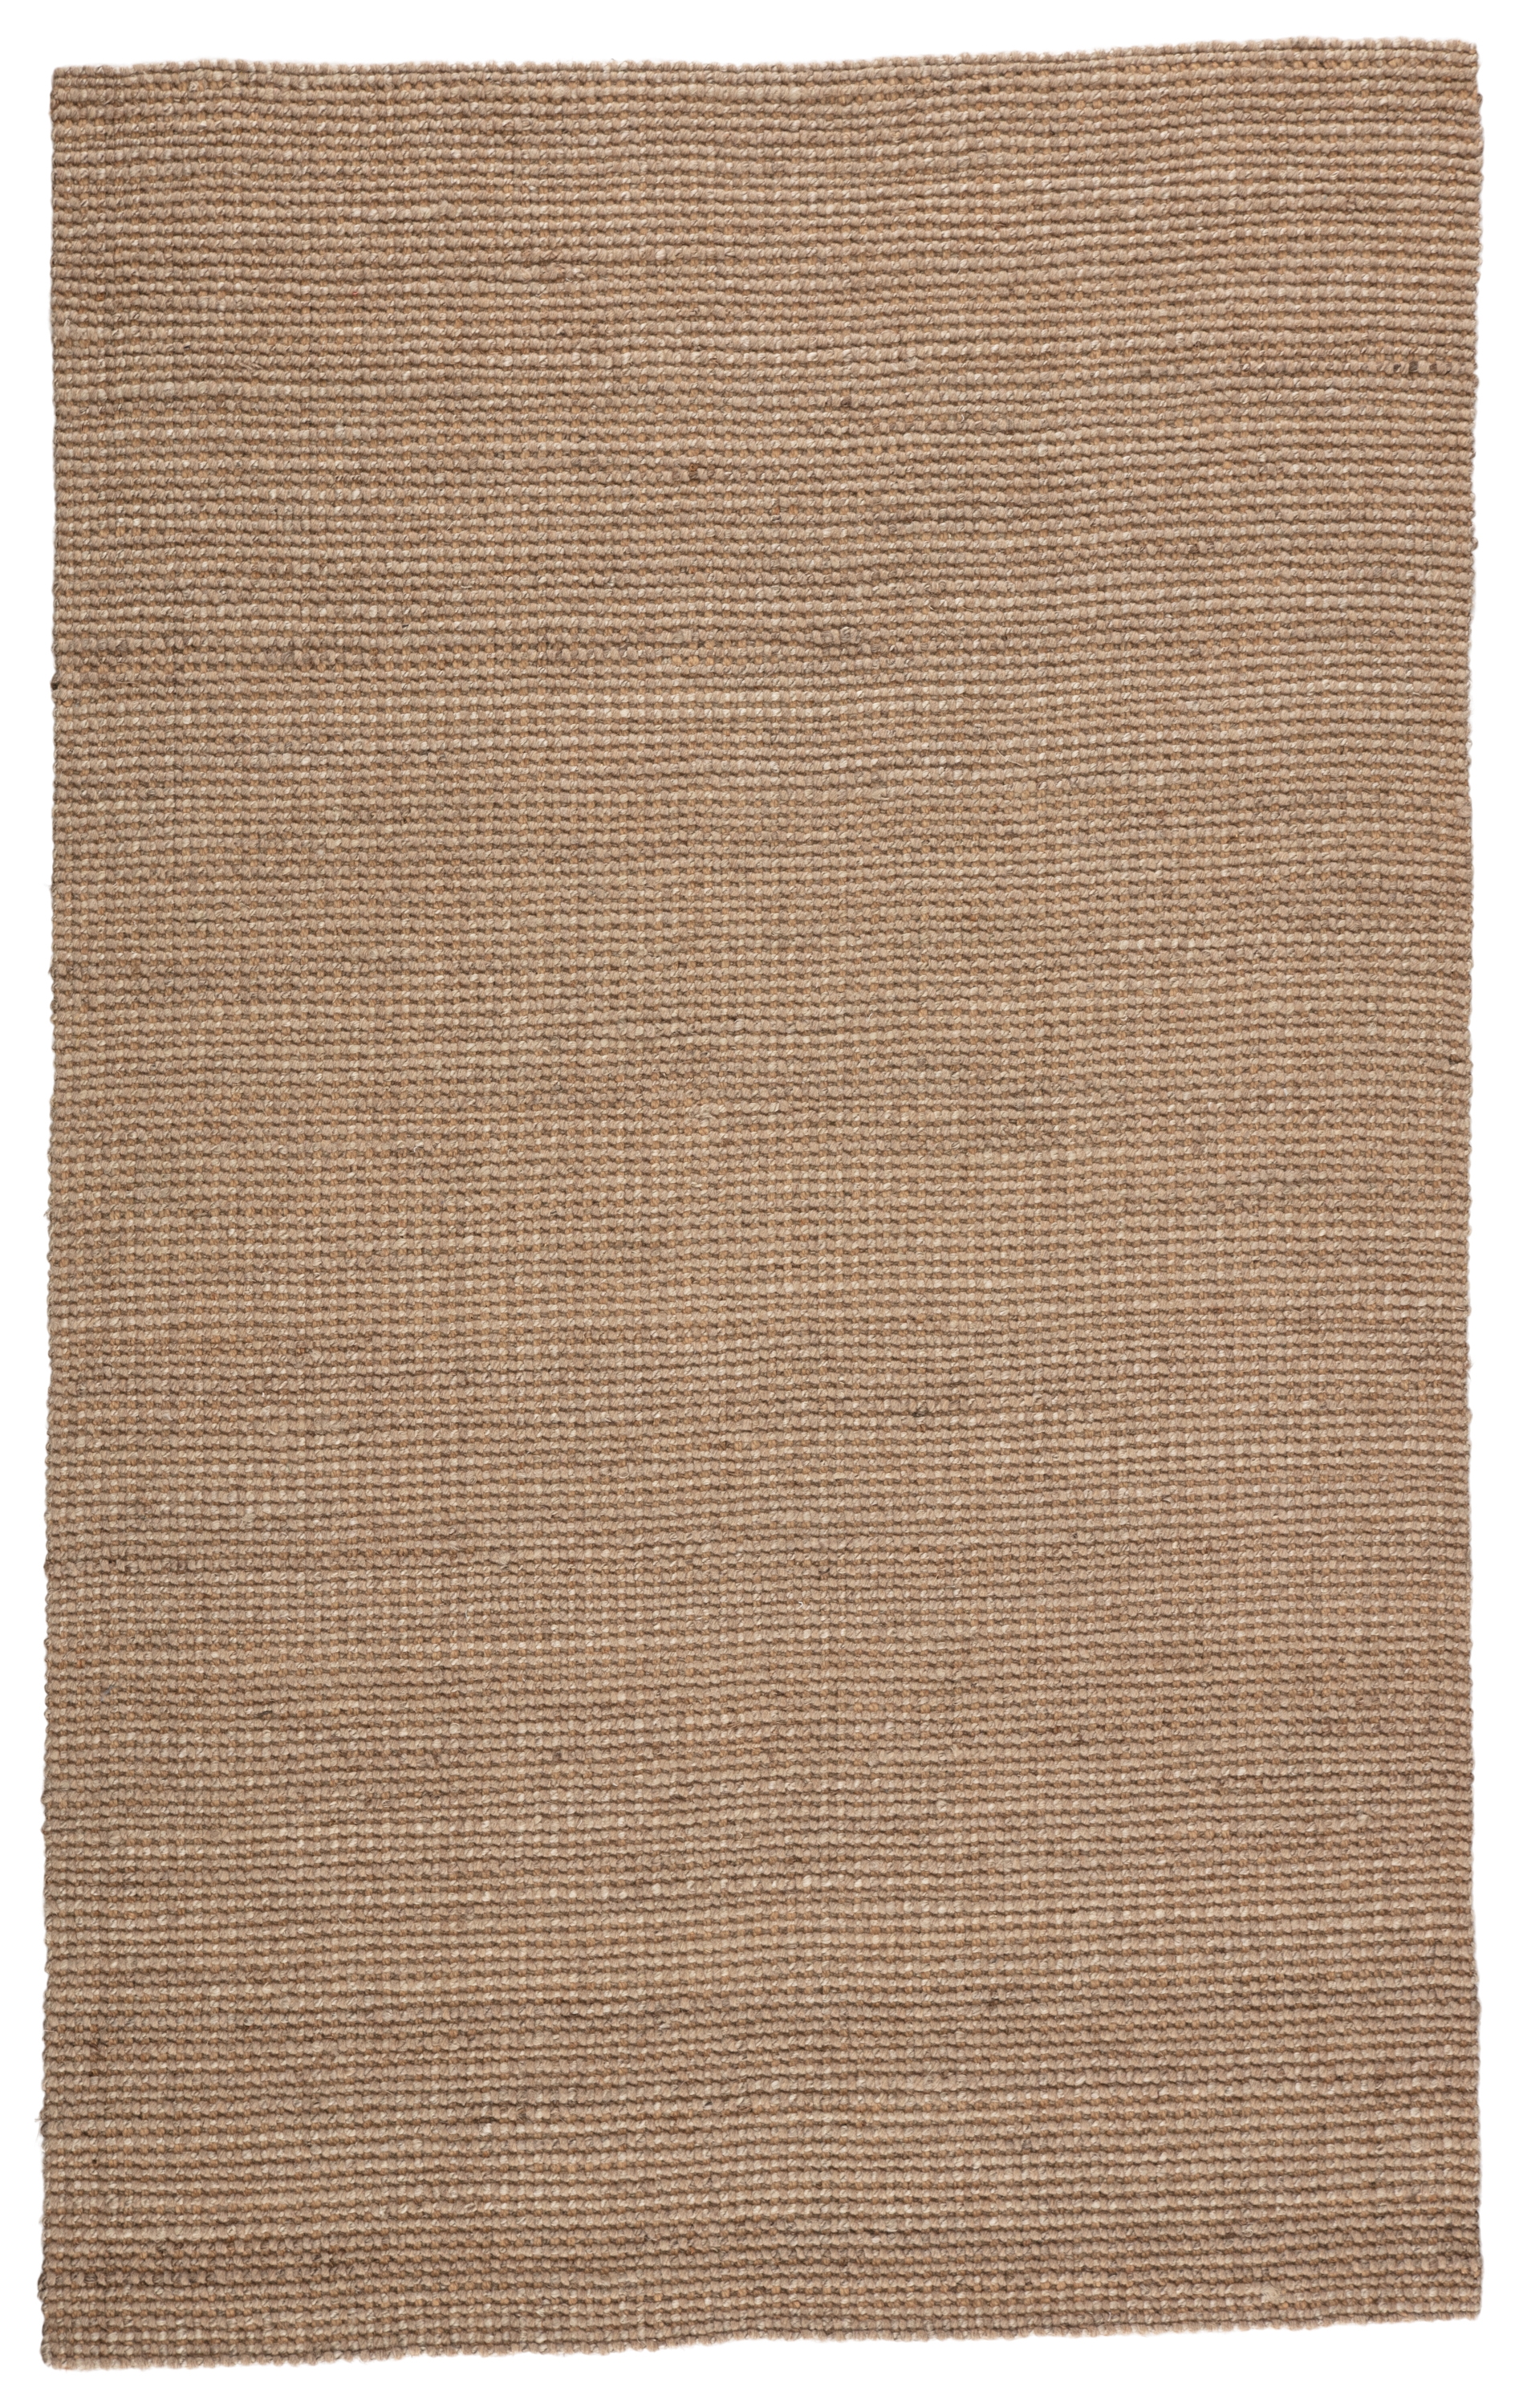 Beech Natural Solid Tan/ Taupe Area Rug (5'X8') - Image 0